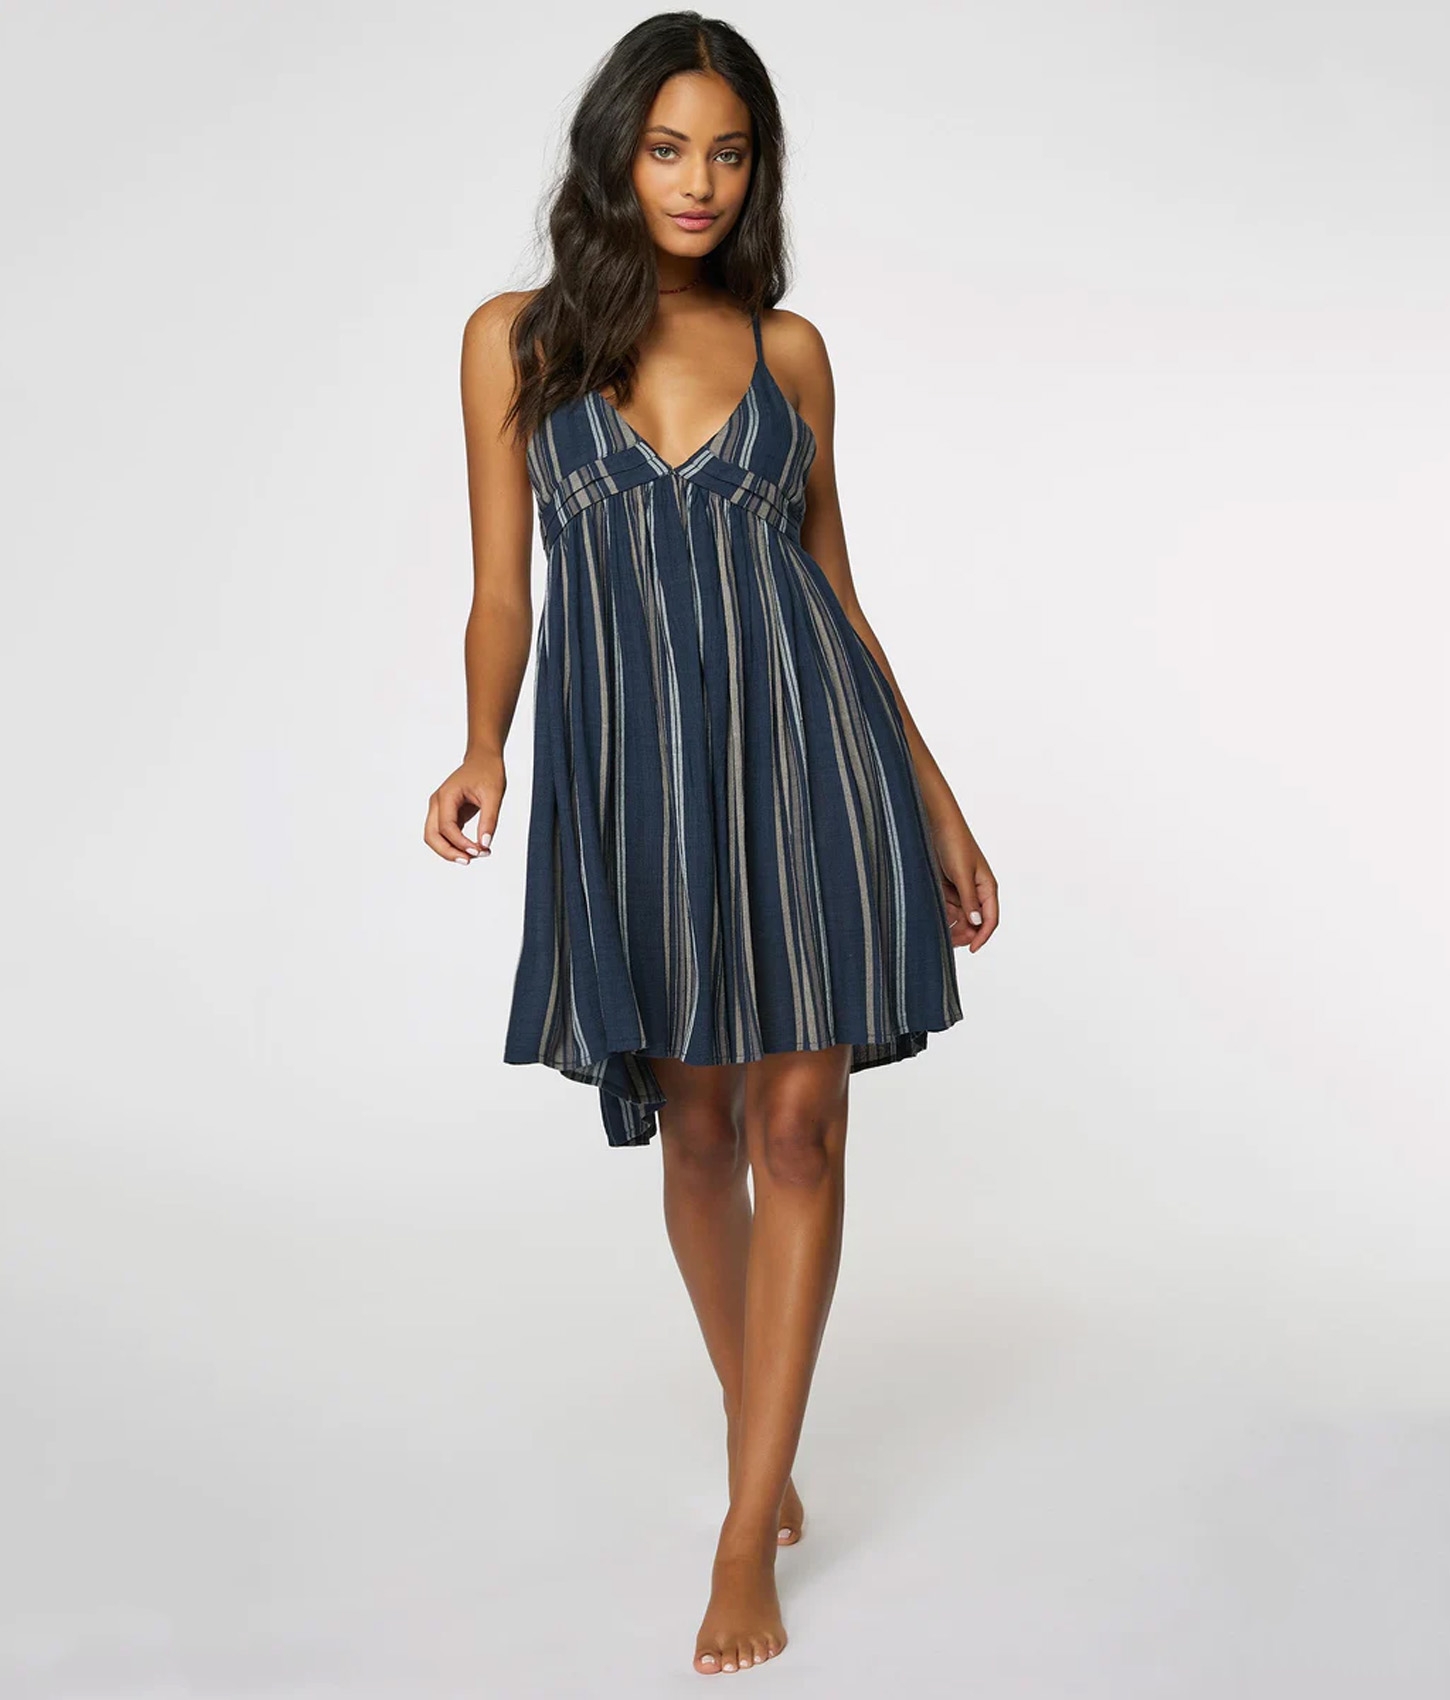 Saltwater Solids Stripe Tank Dress Cover Up